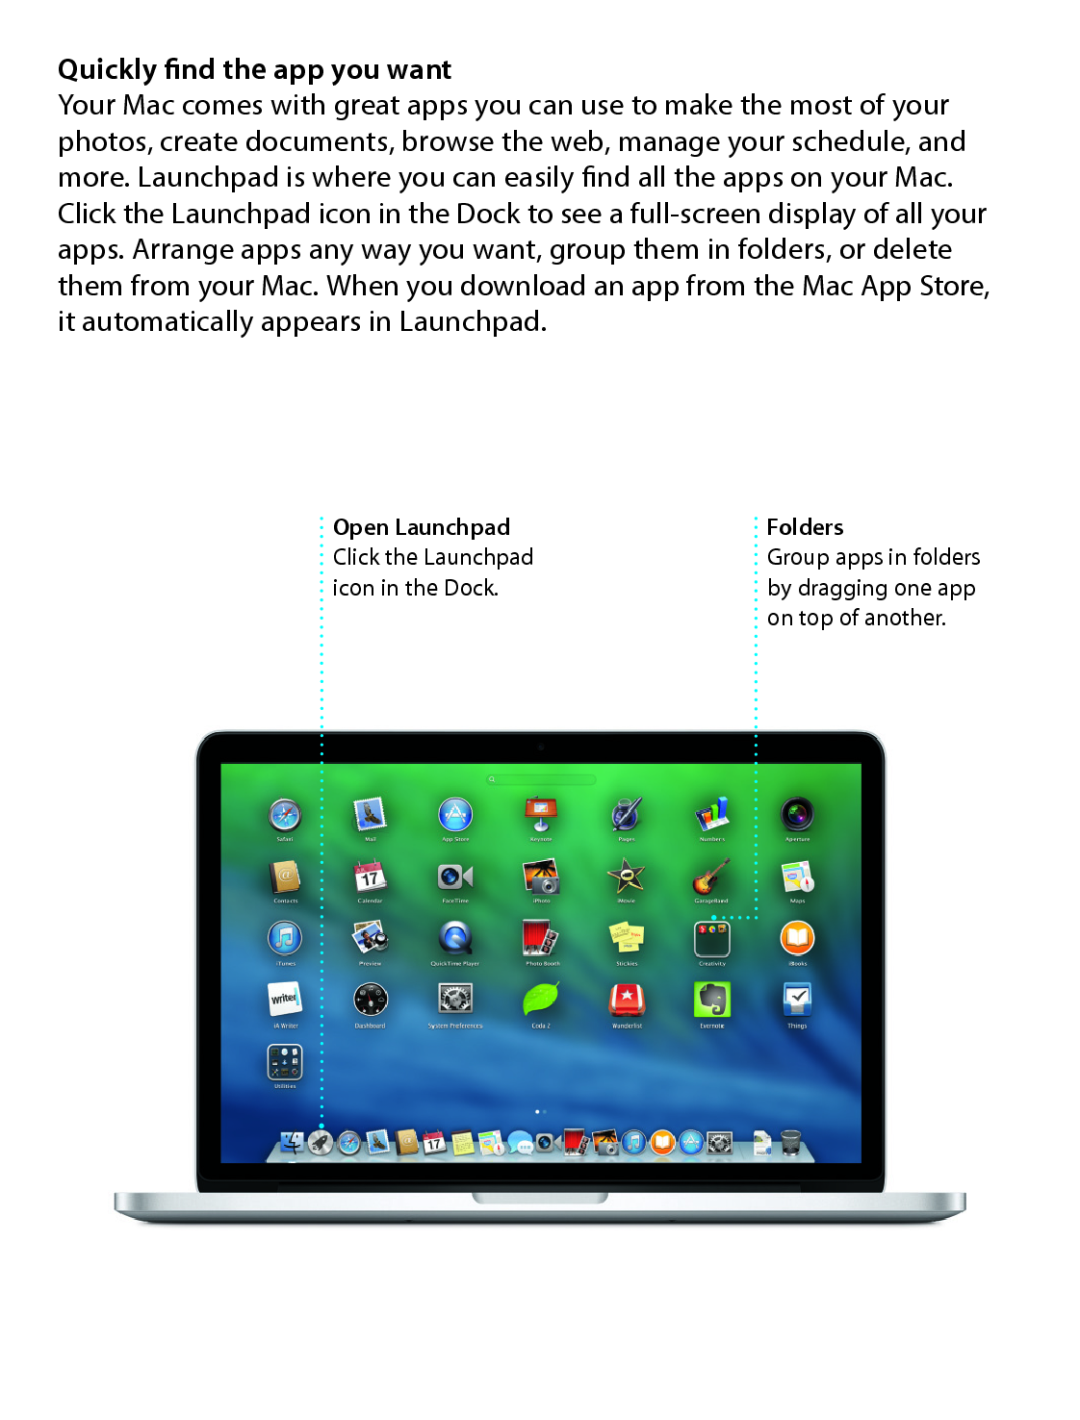 Apple MD212LL/A, ME665LL/A Quickly find the app you want, Open Launchpad Click the Launchpad icon in the Dock, Folders 